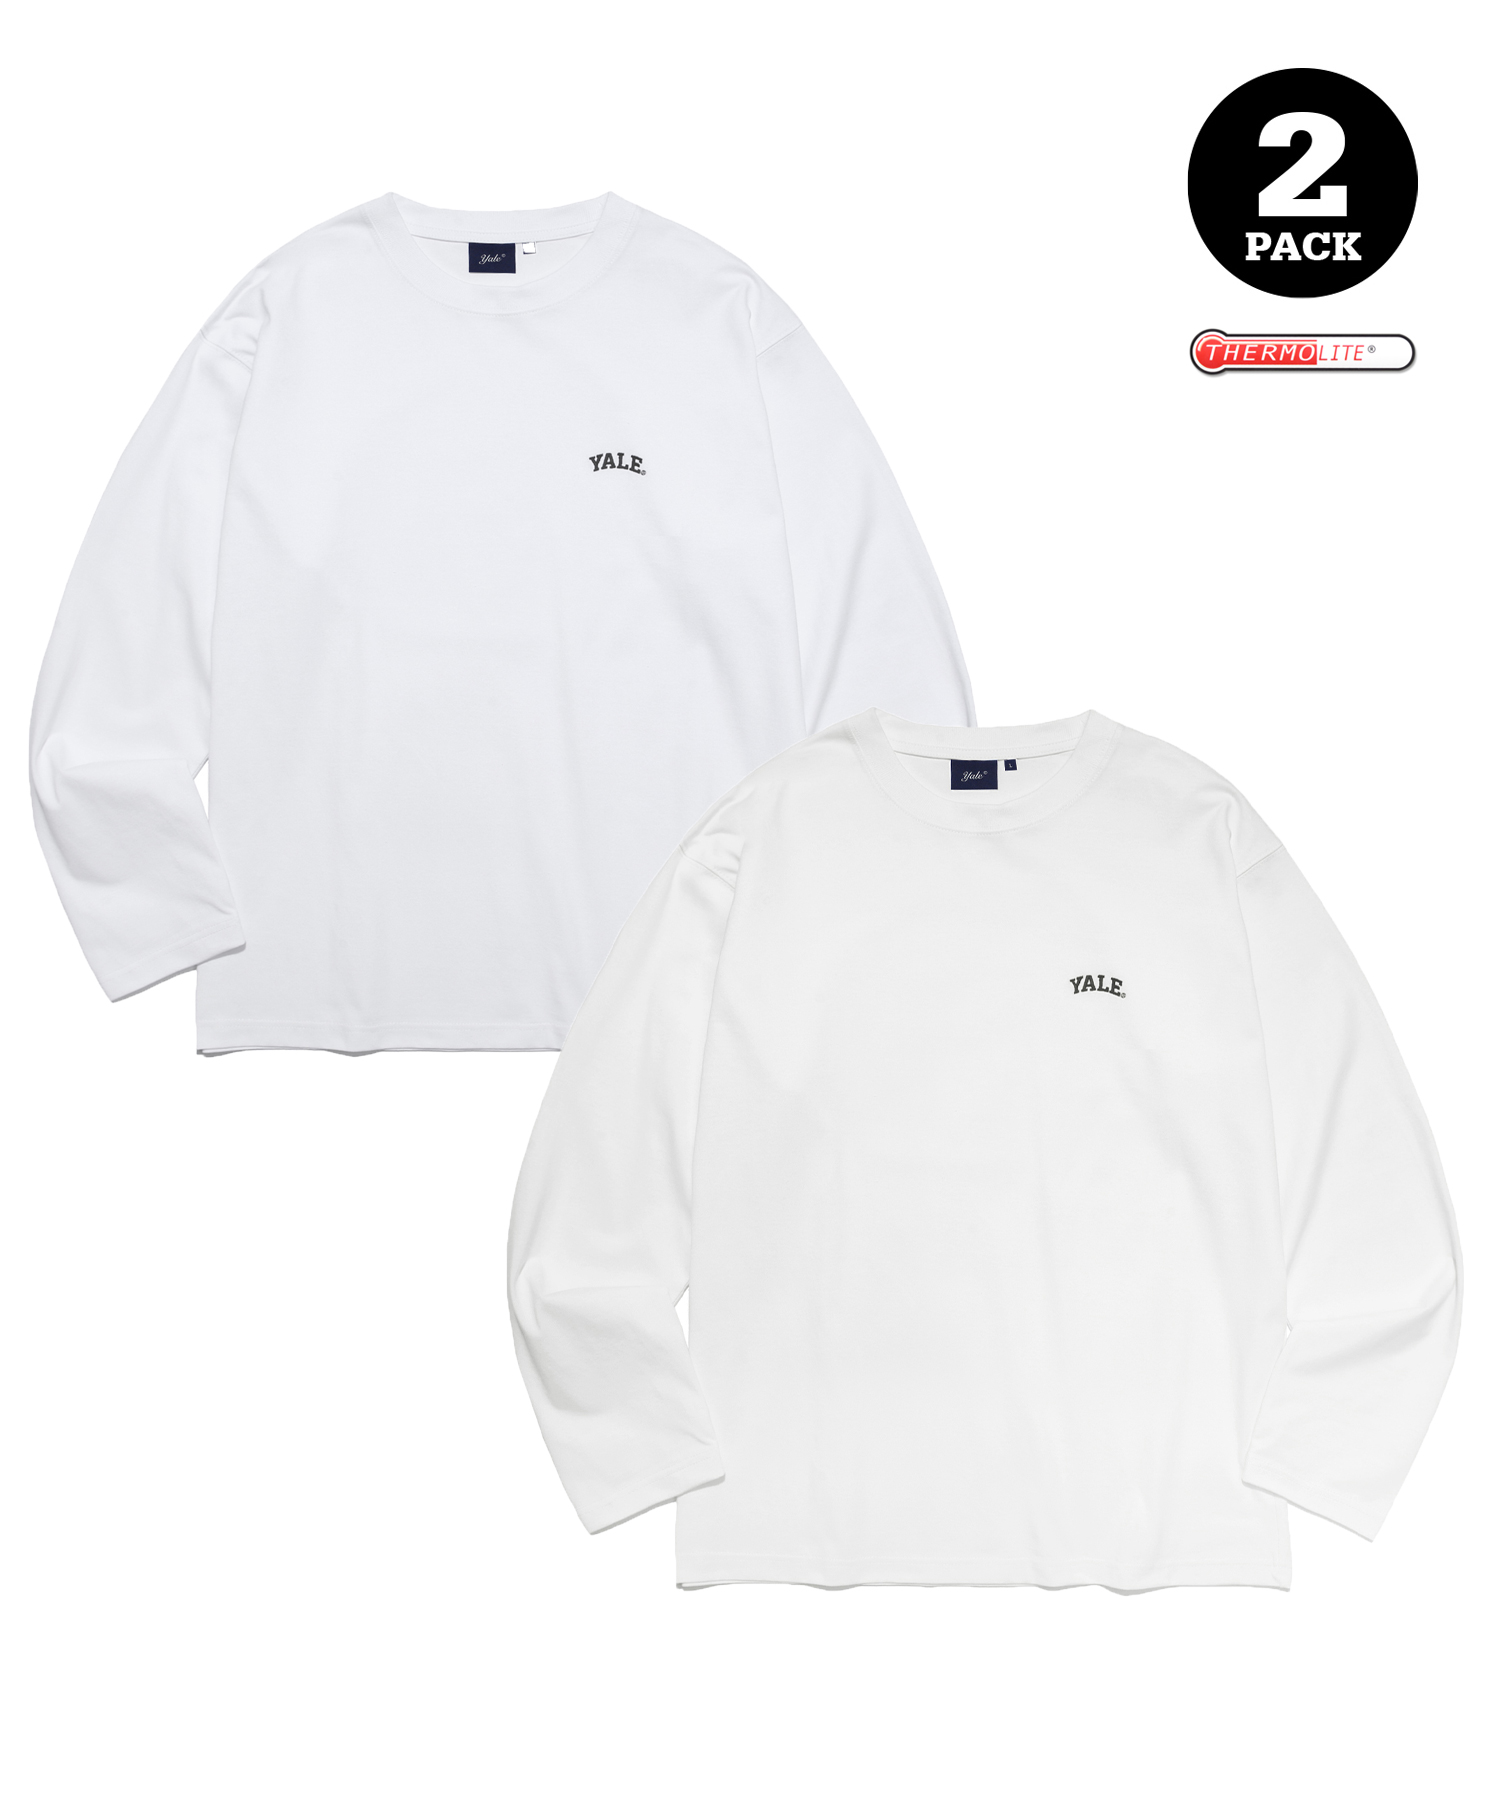 [ONEMILE WEAR] WARM UP 2PACK SMALL ARCH LS WHITE/IVORY